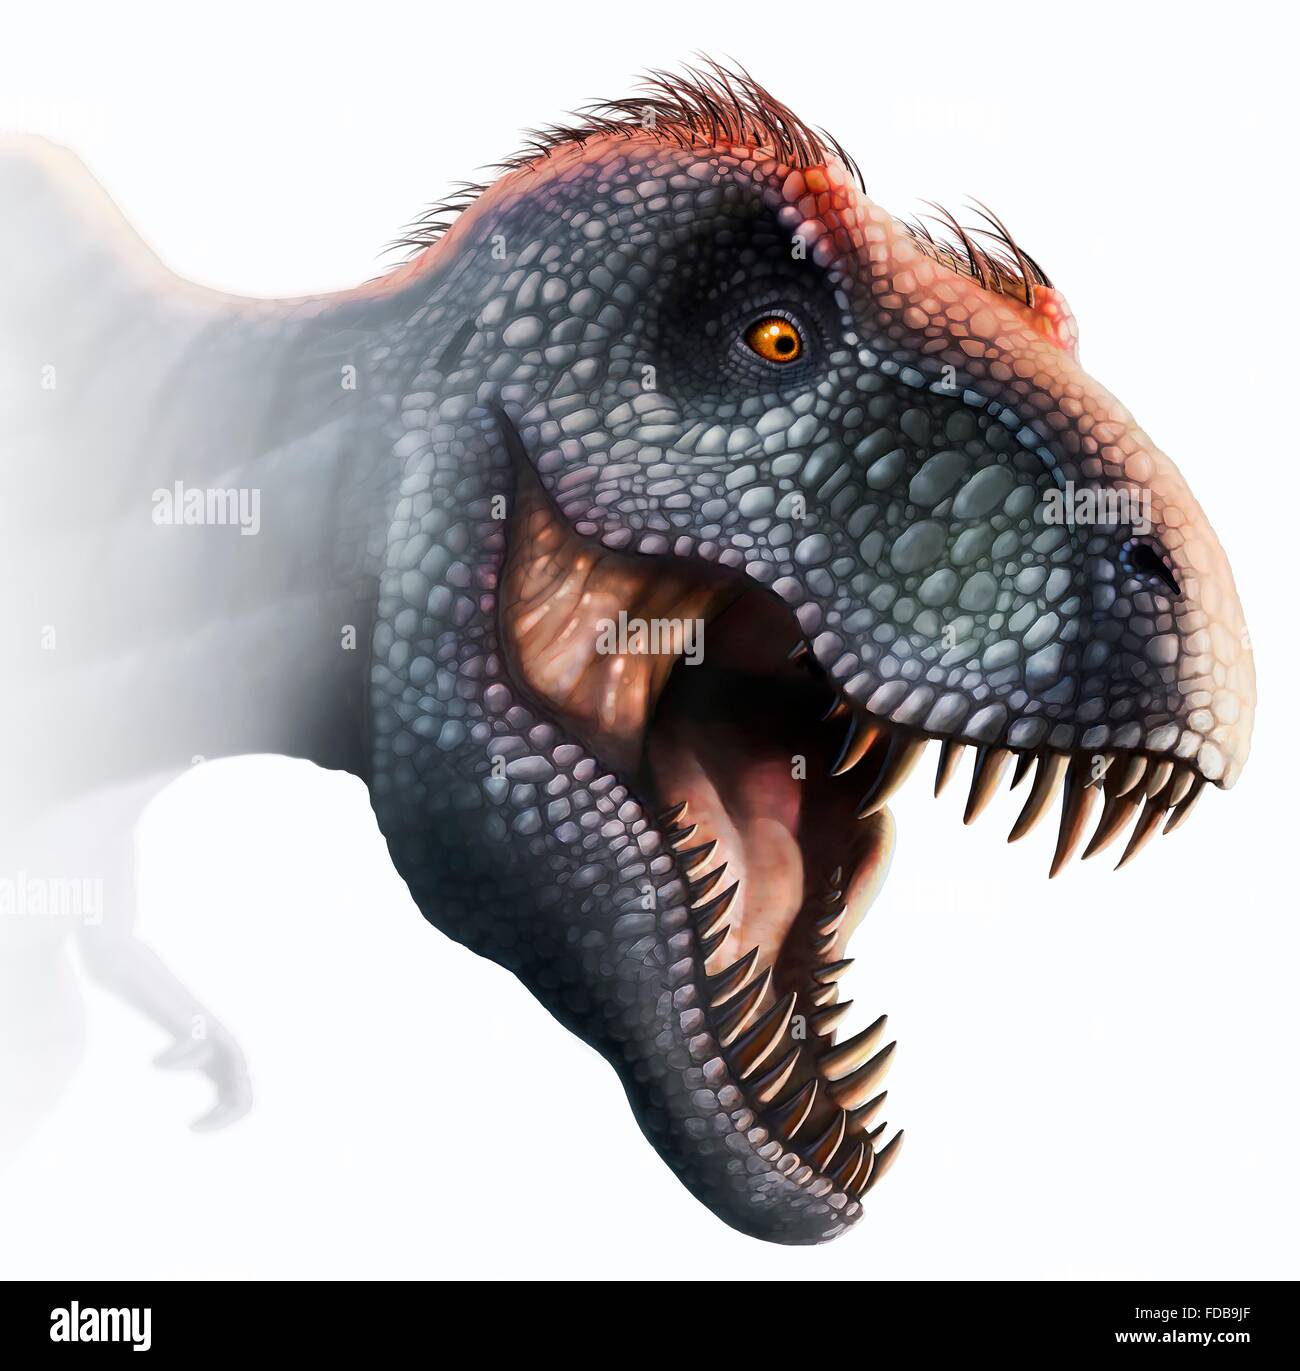 Tyrannosaurus rex head, illustration. This dinosaur lived in North America from about 70 million years ago until the extinction of the dinosaurs some 5 million years later. The head is heavily built, to withstand impacts with prey animals, and has the sharp teeth of a predator. T. rex is thought to have been a scavenger as well as a hunter. Among the largest carnivorous dinosaurs, T. rex was up to 6 metres tall and weighed as much as 7 tonnes.The animal is depicted with brown feathers, although whether it had them in real life is speculative. Stock Photo